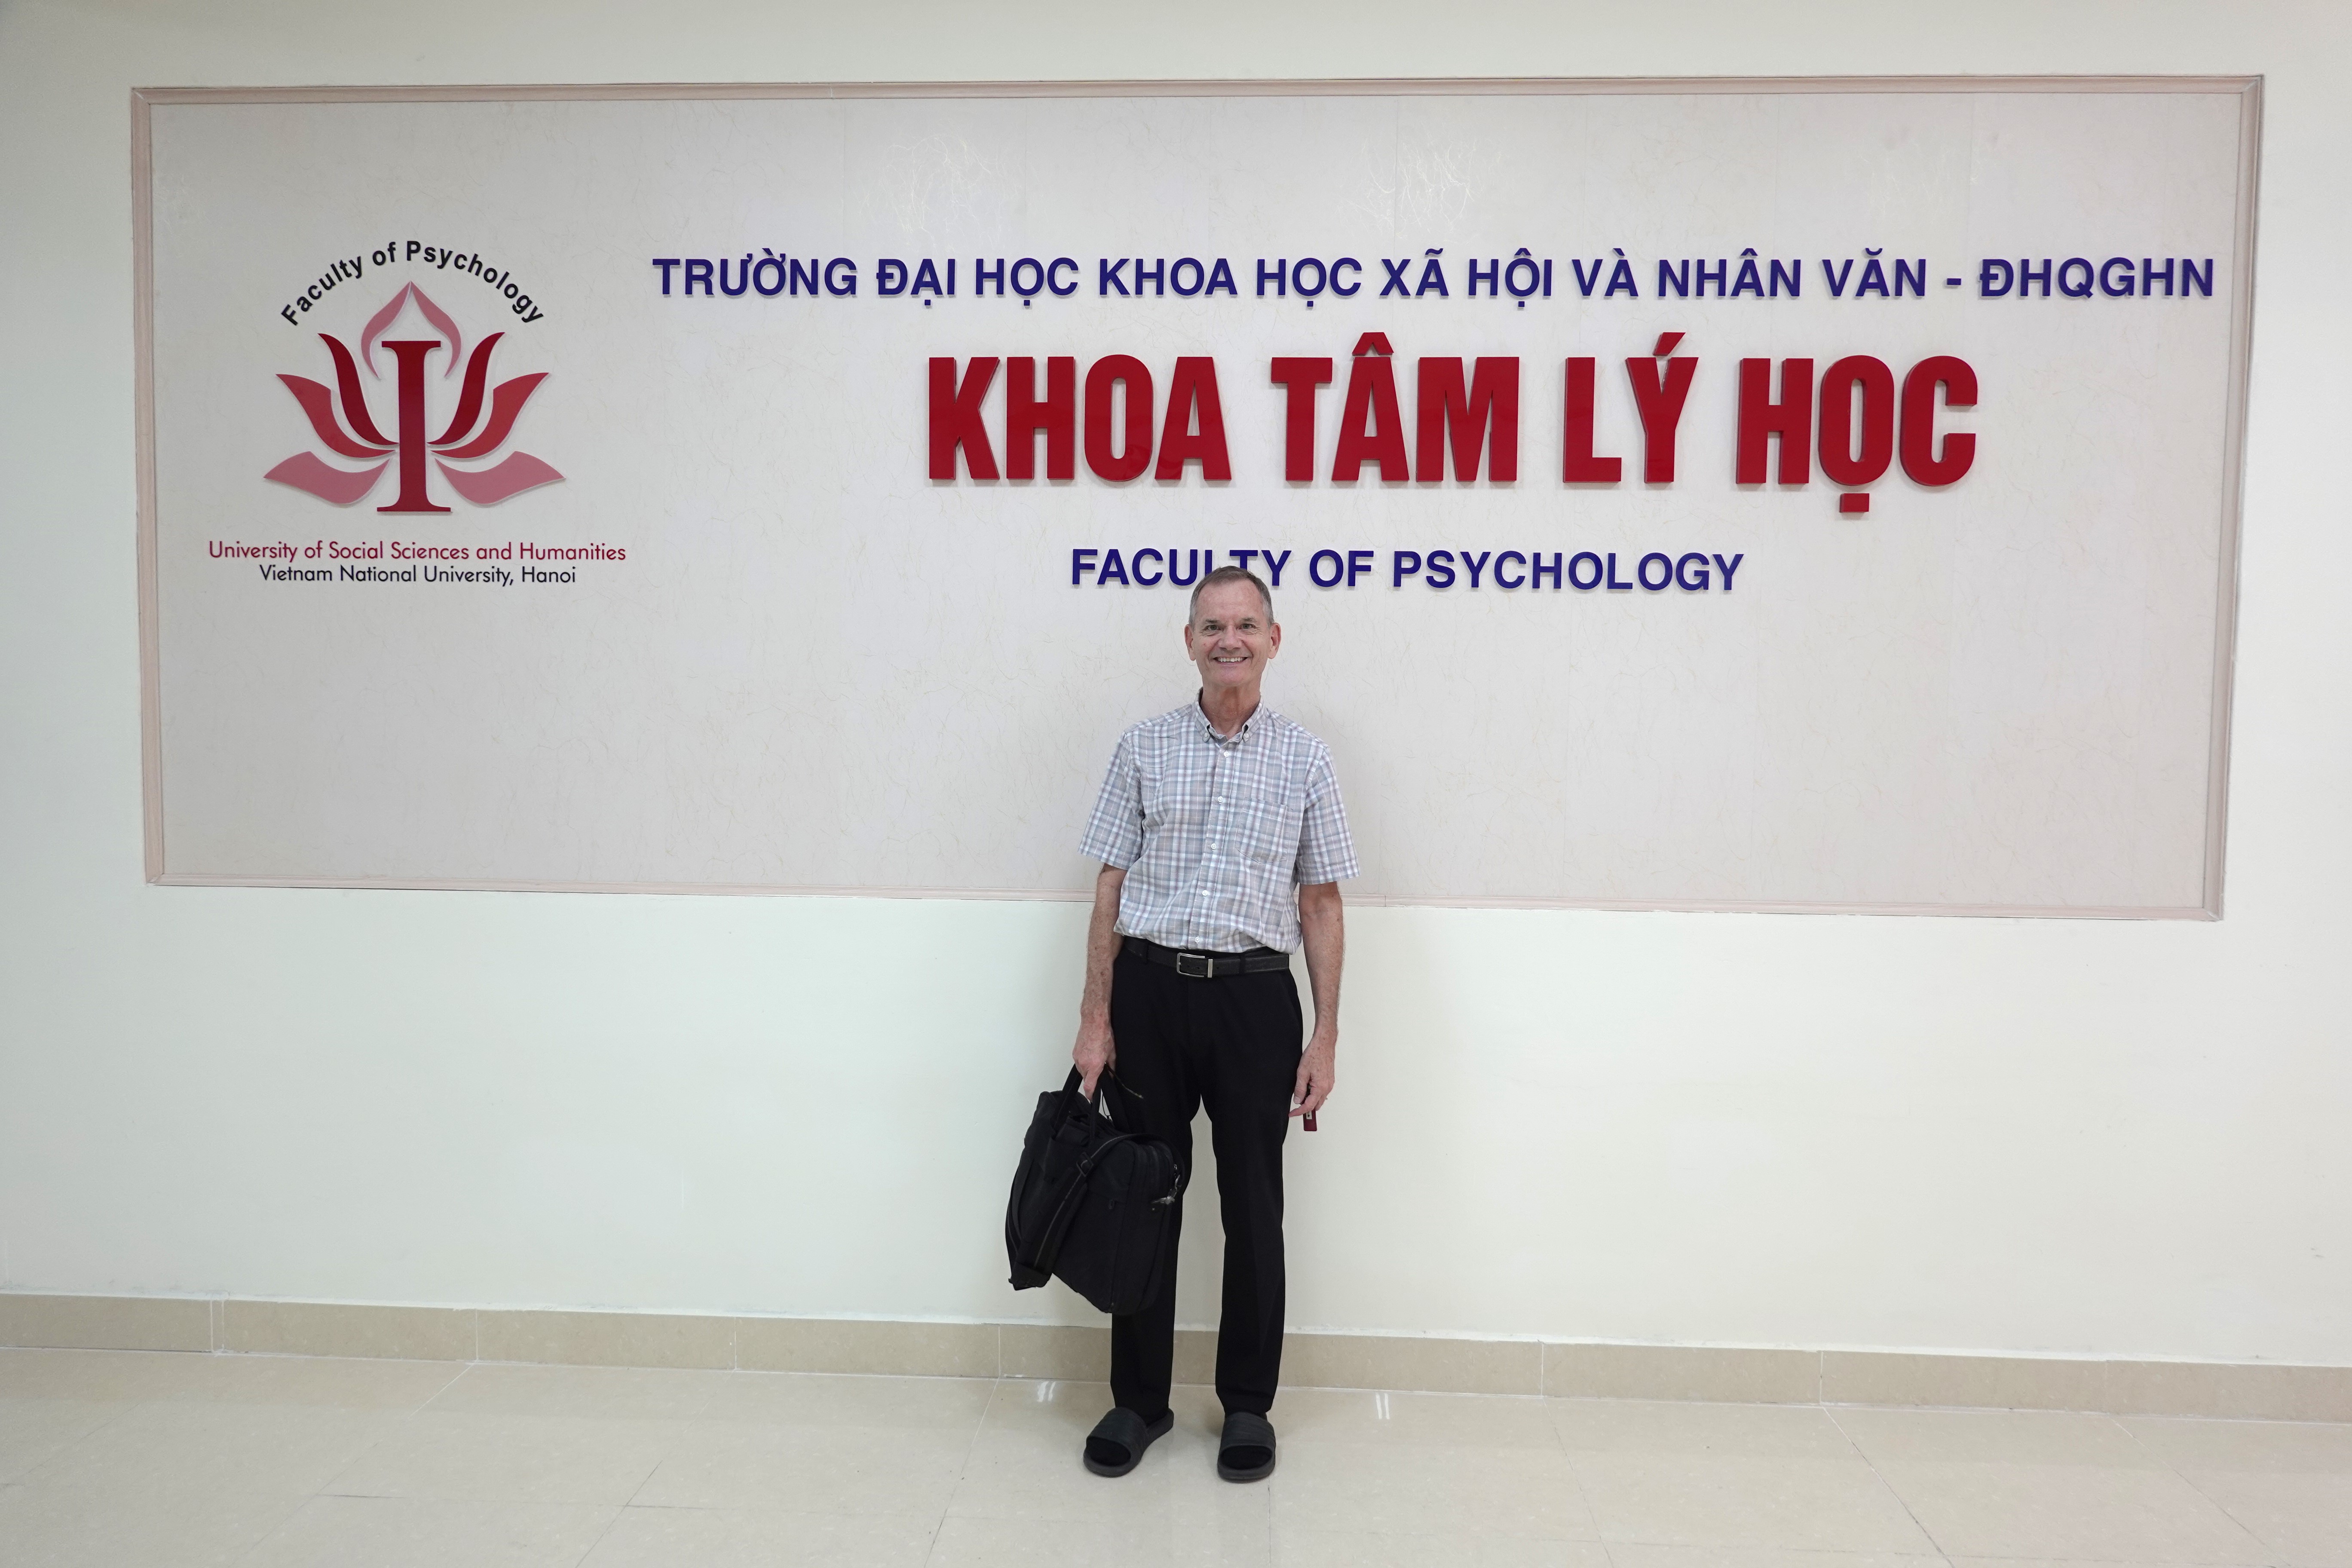 Picture of me standing in front of sign in English and Vietnamese that says " Faculty of Psycholoy, University of Social Sciences and Humanities, Vietnam National University""